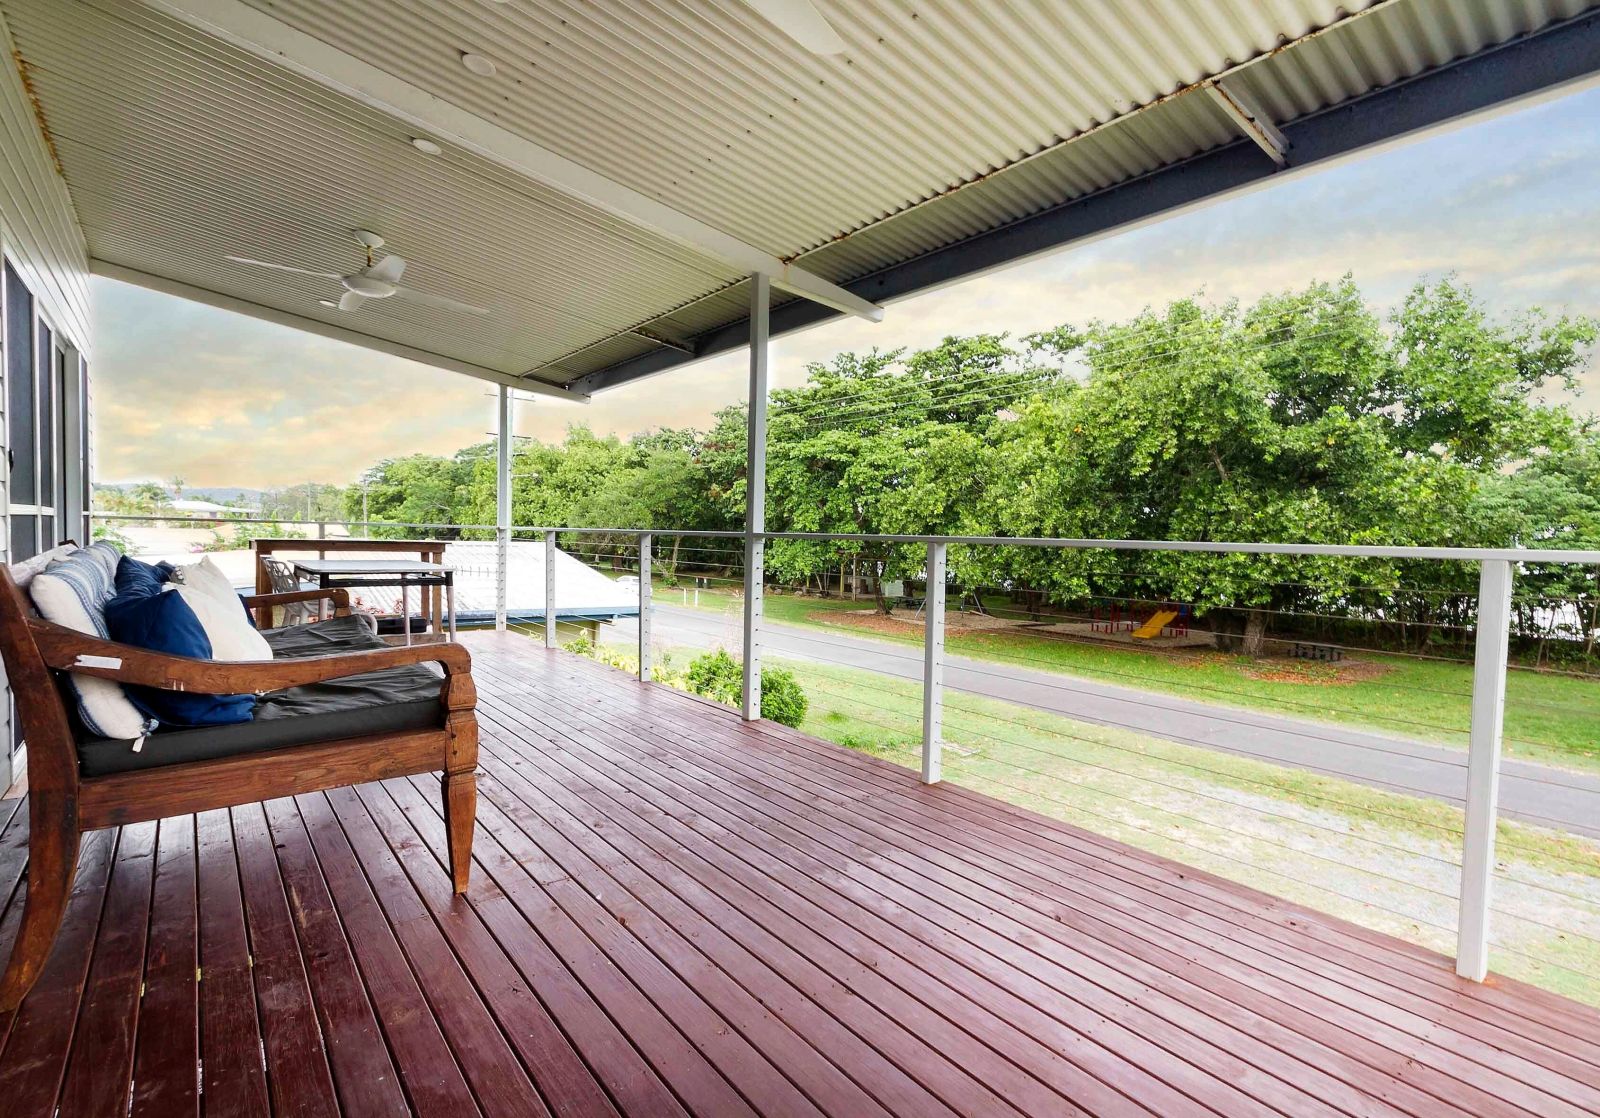 Wide upstairs terrace for seabreezes and views